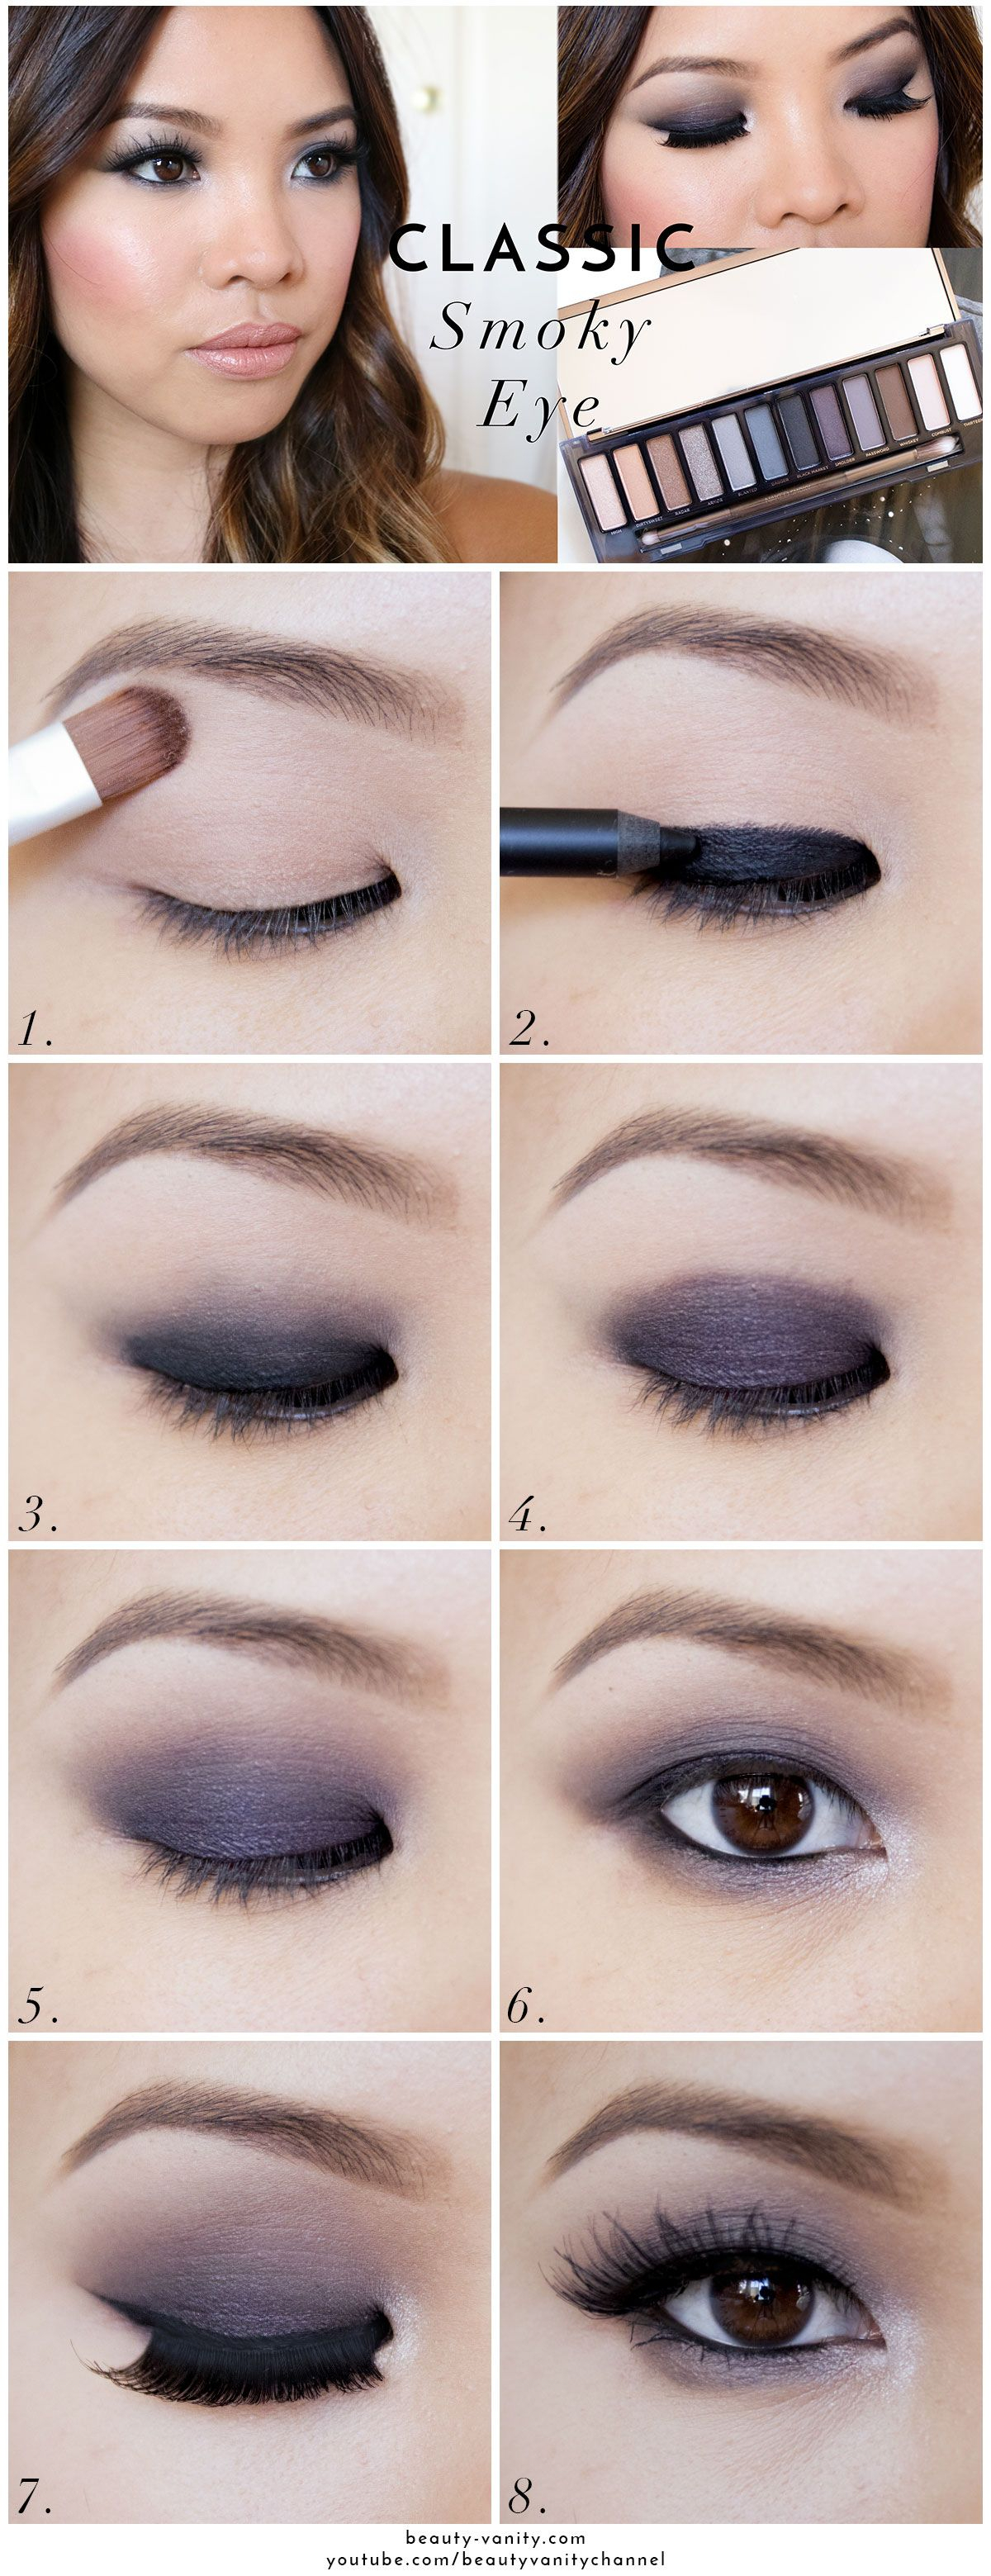 Asian Eyes Makeup The Beauty Vanity Classic Smoky Eye Makeup For Asian Eyes